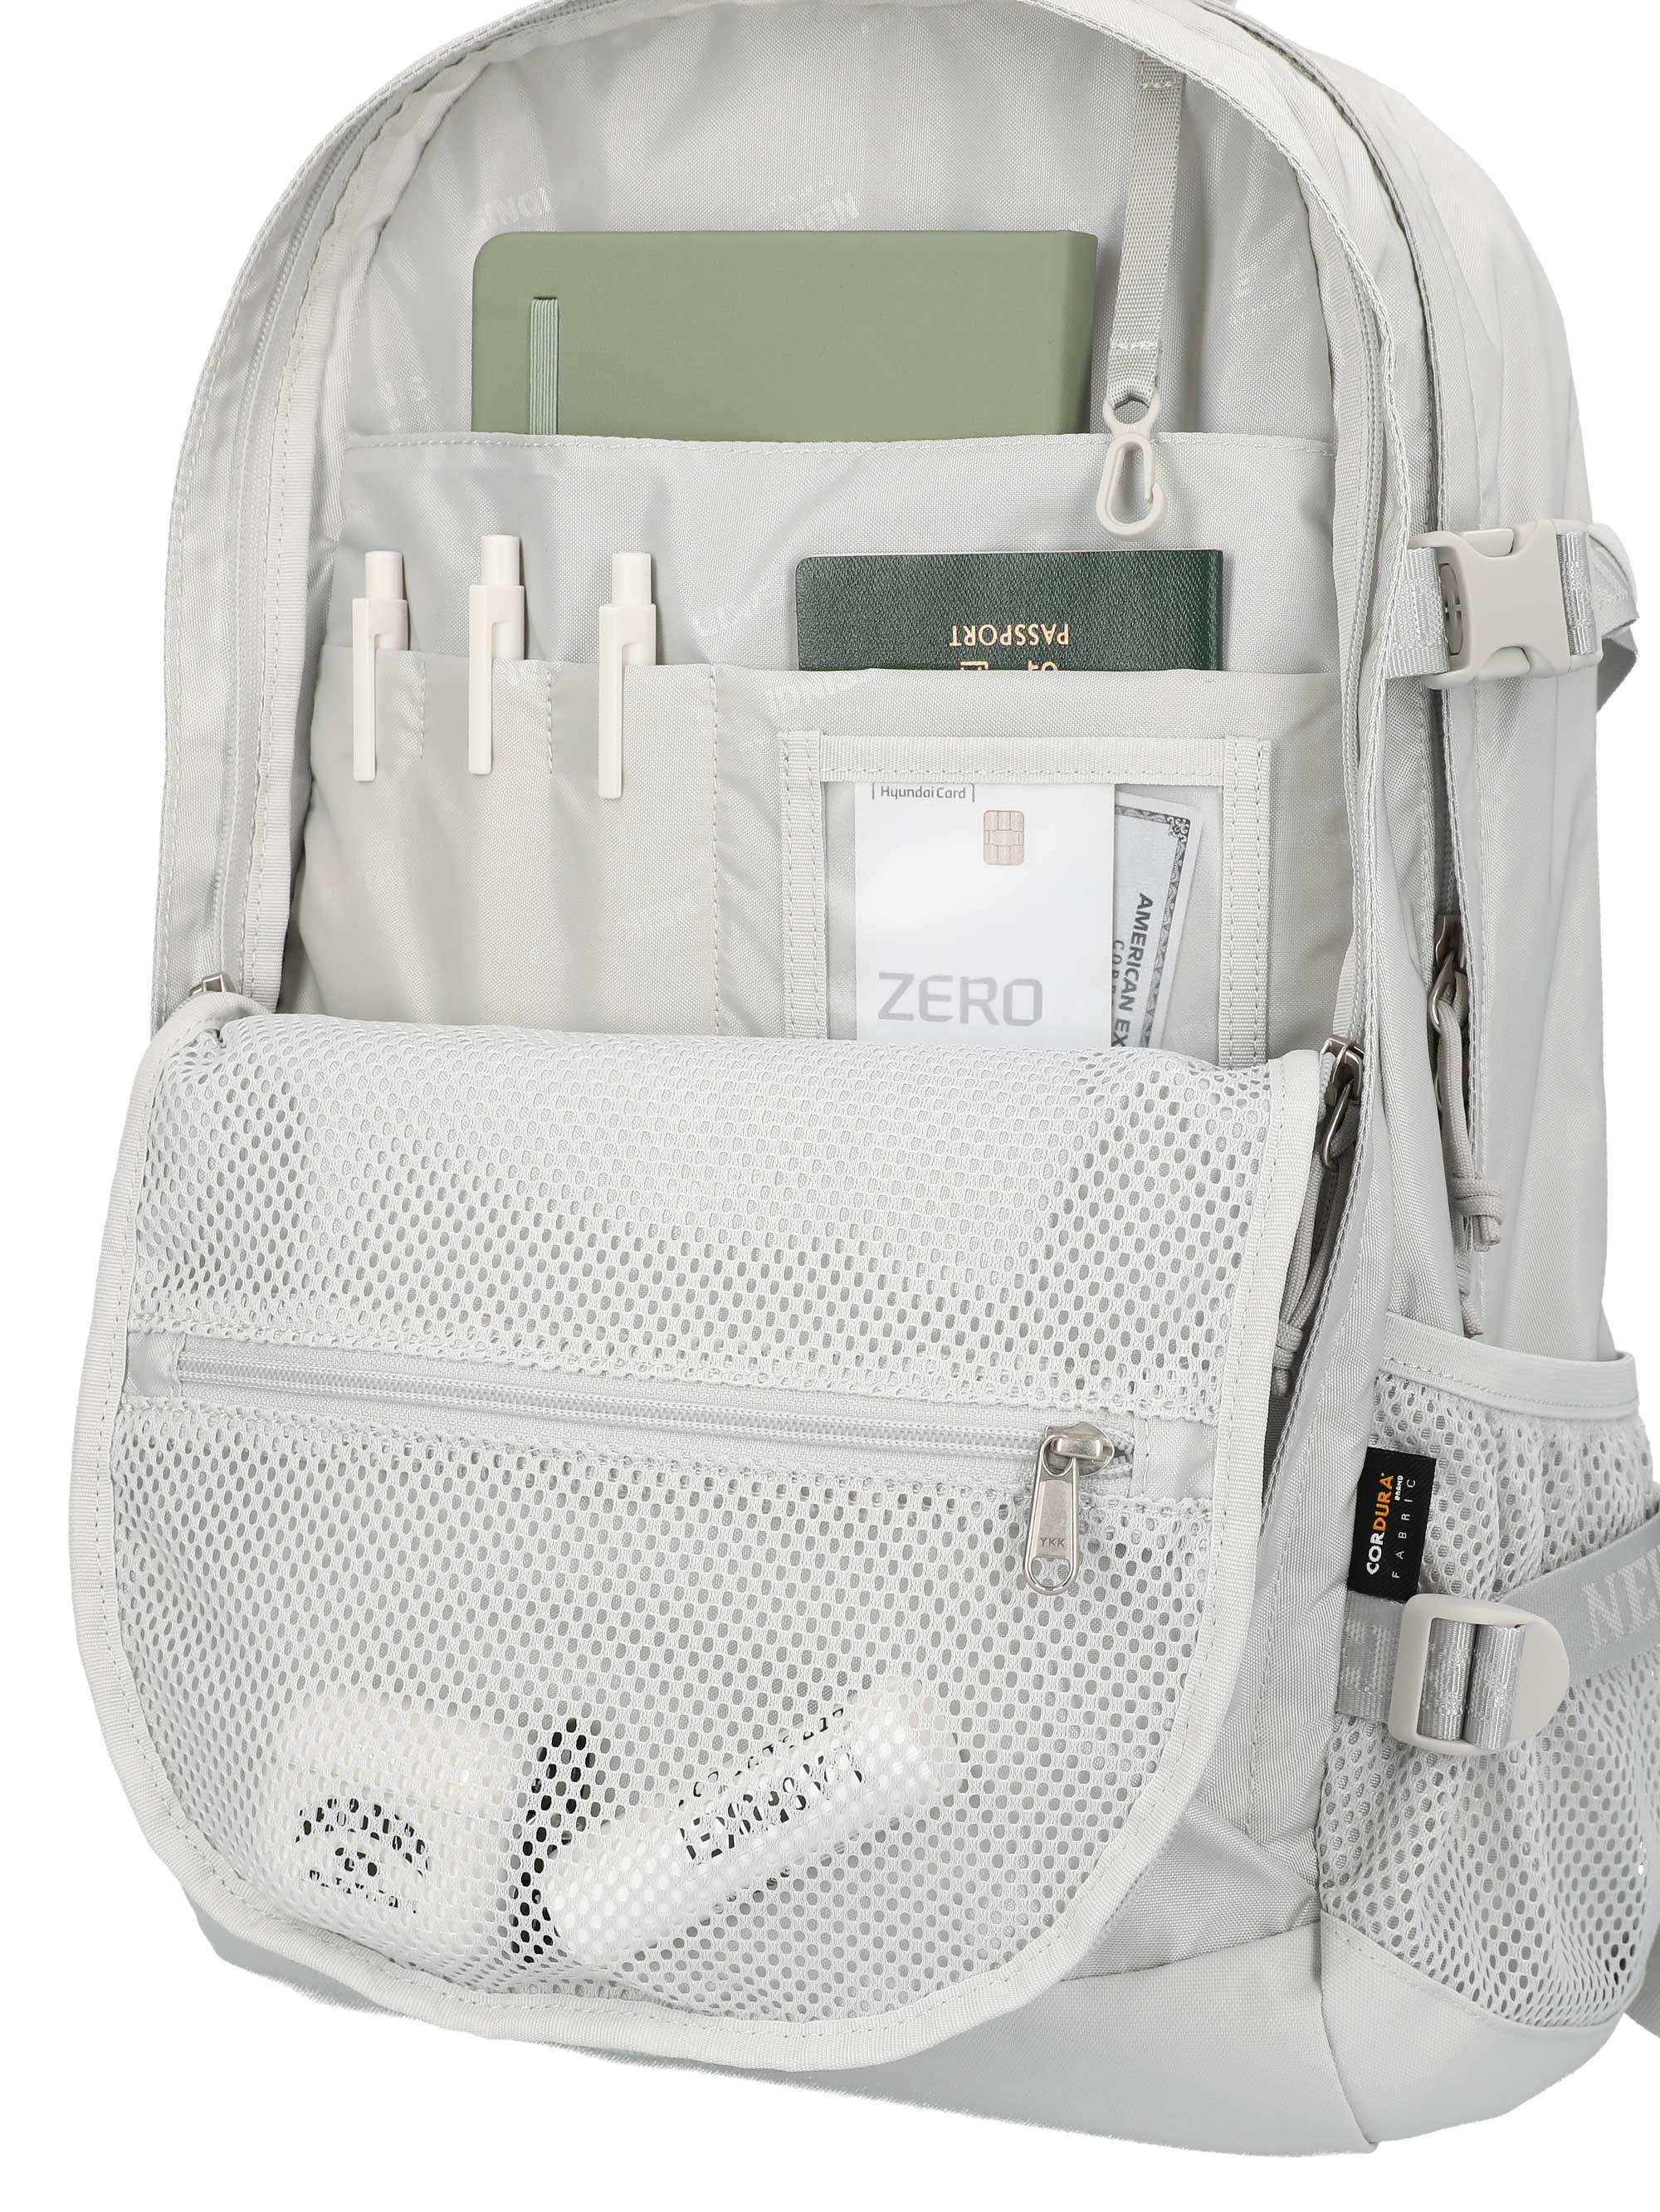 ALPHA AIR BACKPACK / MINERAL GRAY